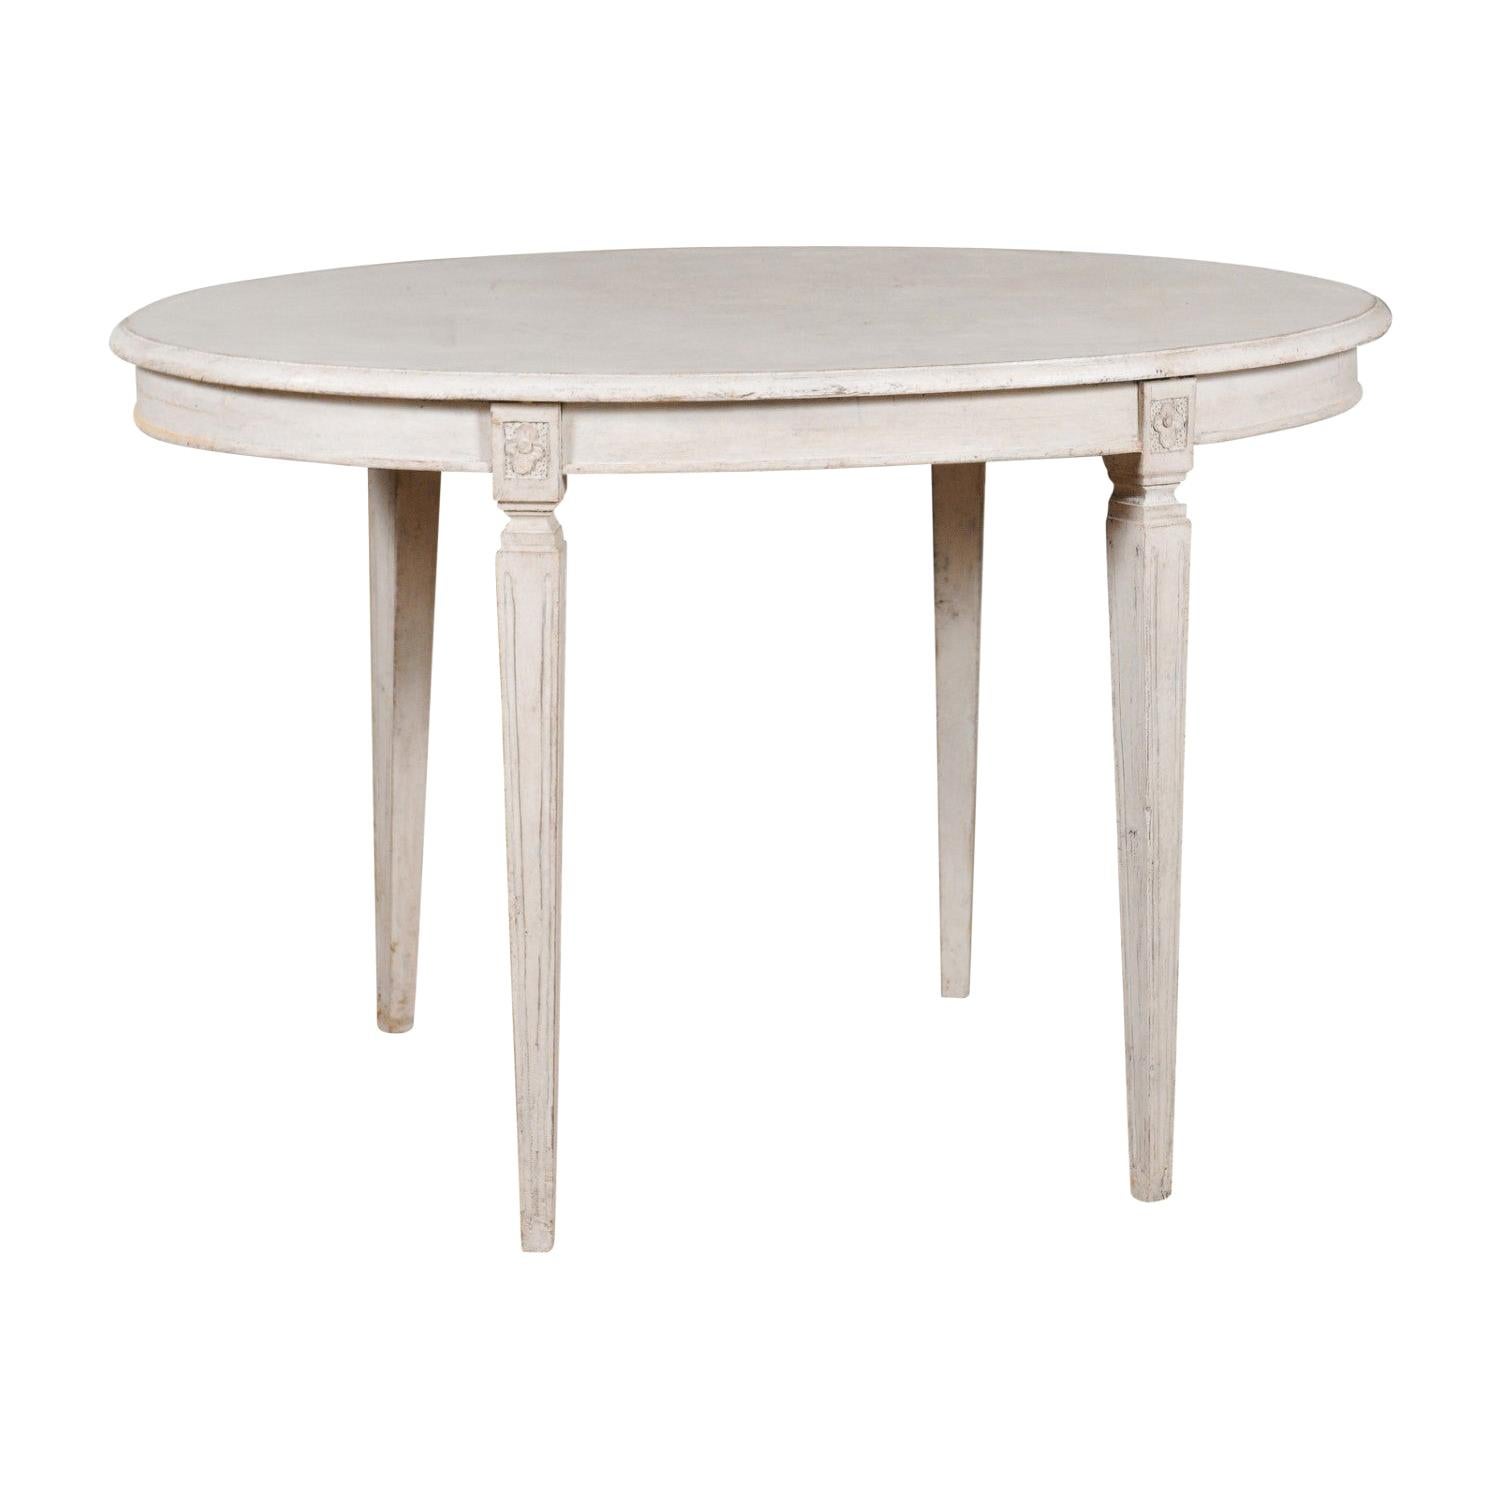 Swedish Gustavian Style 1880s Oval Top Painted Table with Tapered Fluted Legs